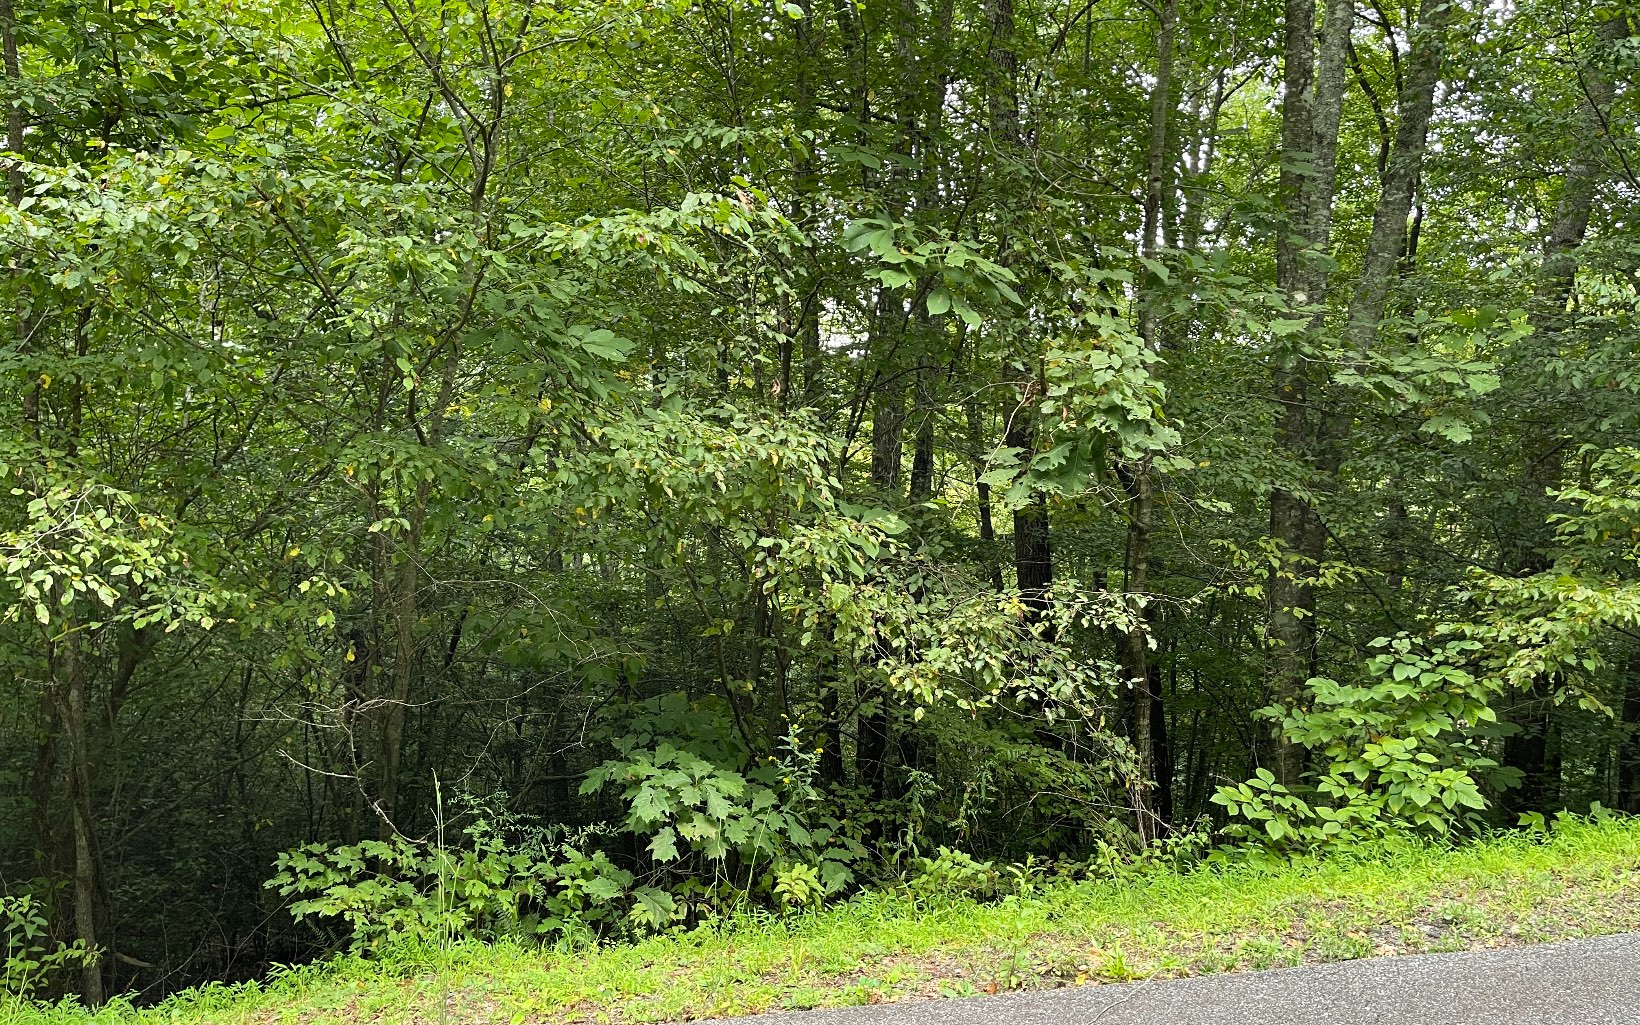 BEAUTIFULLY WOODED LOT IN THE MOUNTAINS OF NORTH GEORGIA! Located in the paved Bear Trail subdivision, this 1.3 acre lot offers tall hardwoods, loads of wildlife and the perfect place to build your private North Georgia mountain retreat.